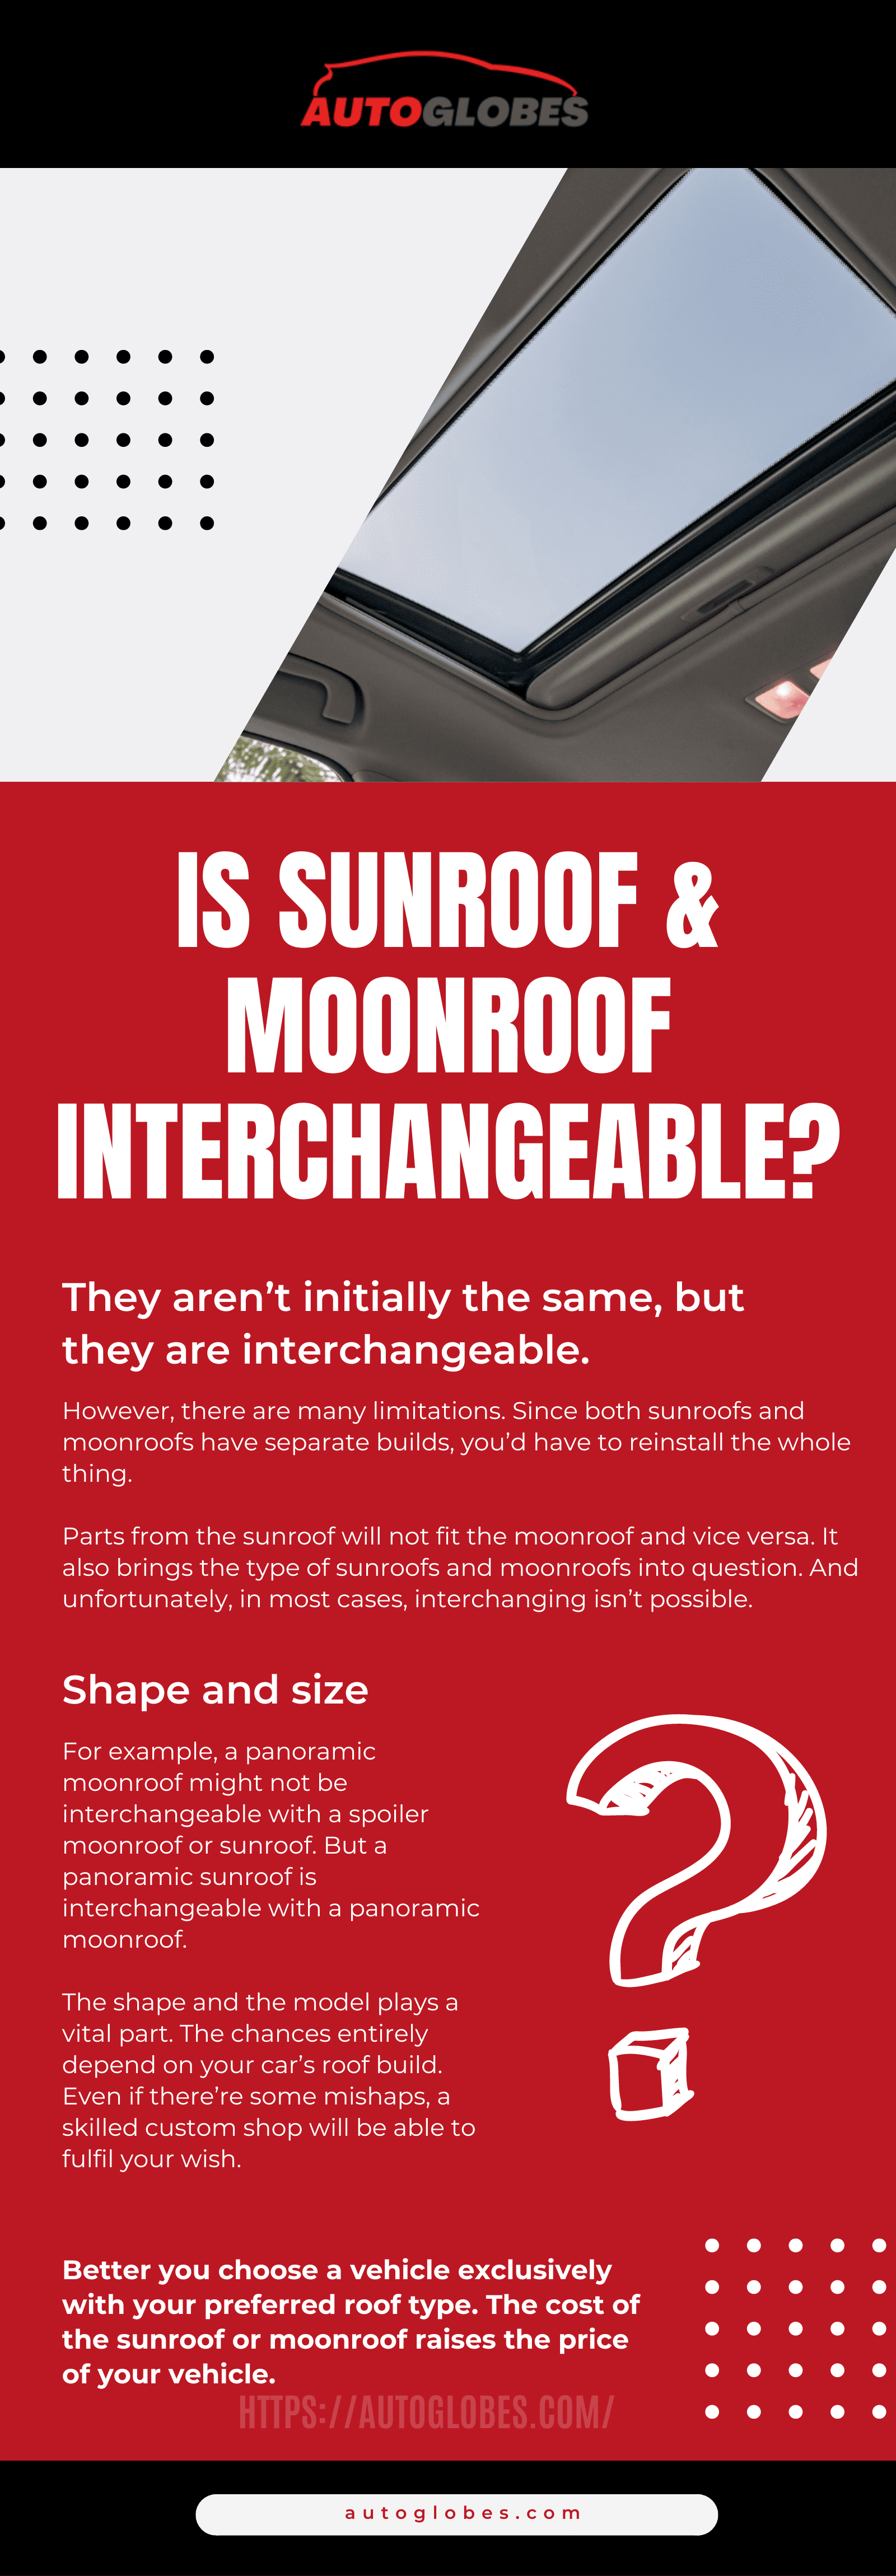 Is Sunroof & Moonroof Interchangeable Infographic